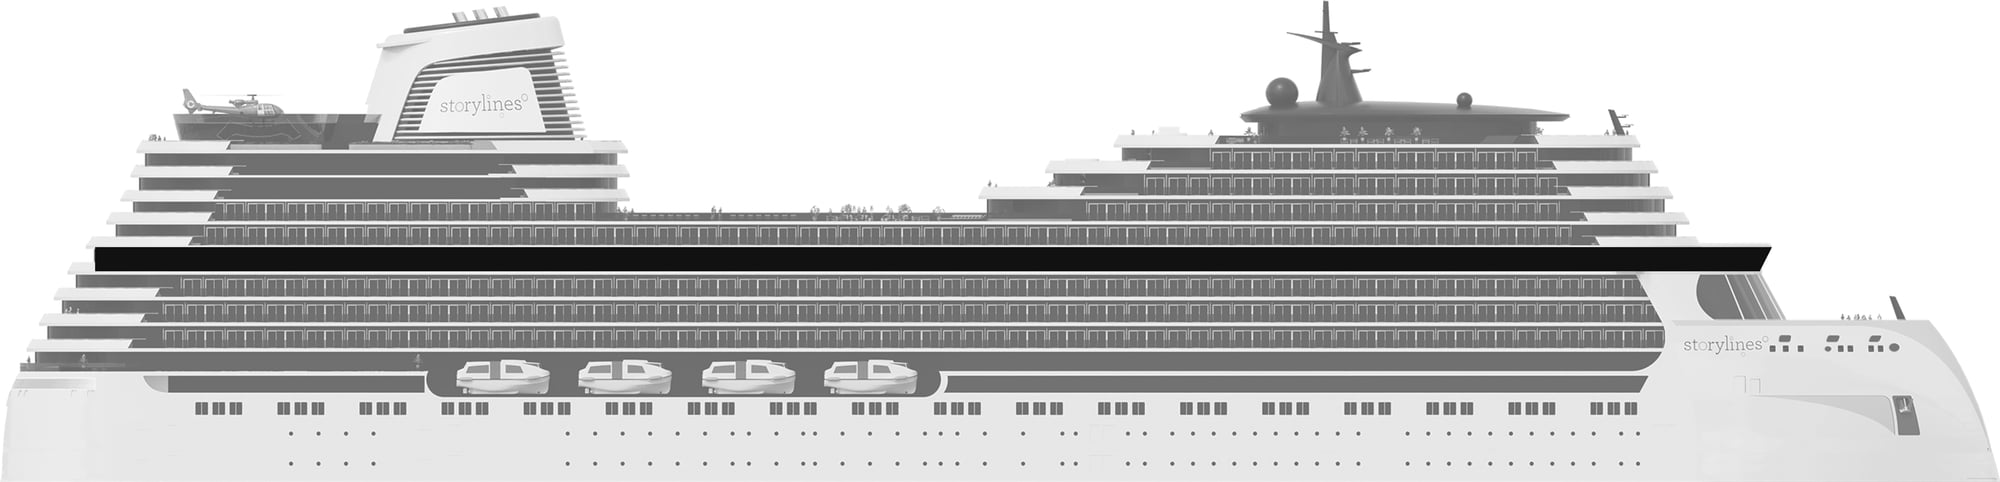 Profile shot of Storylines residential ship showing the location of Deck 12